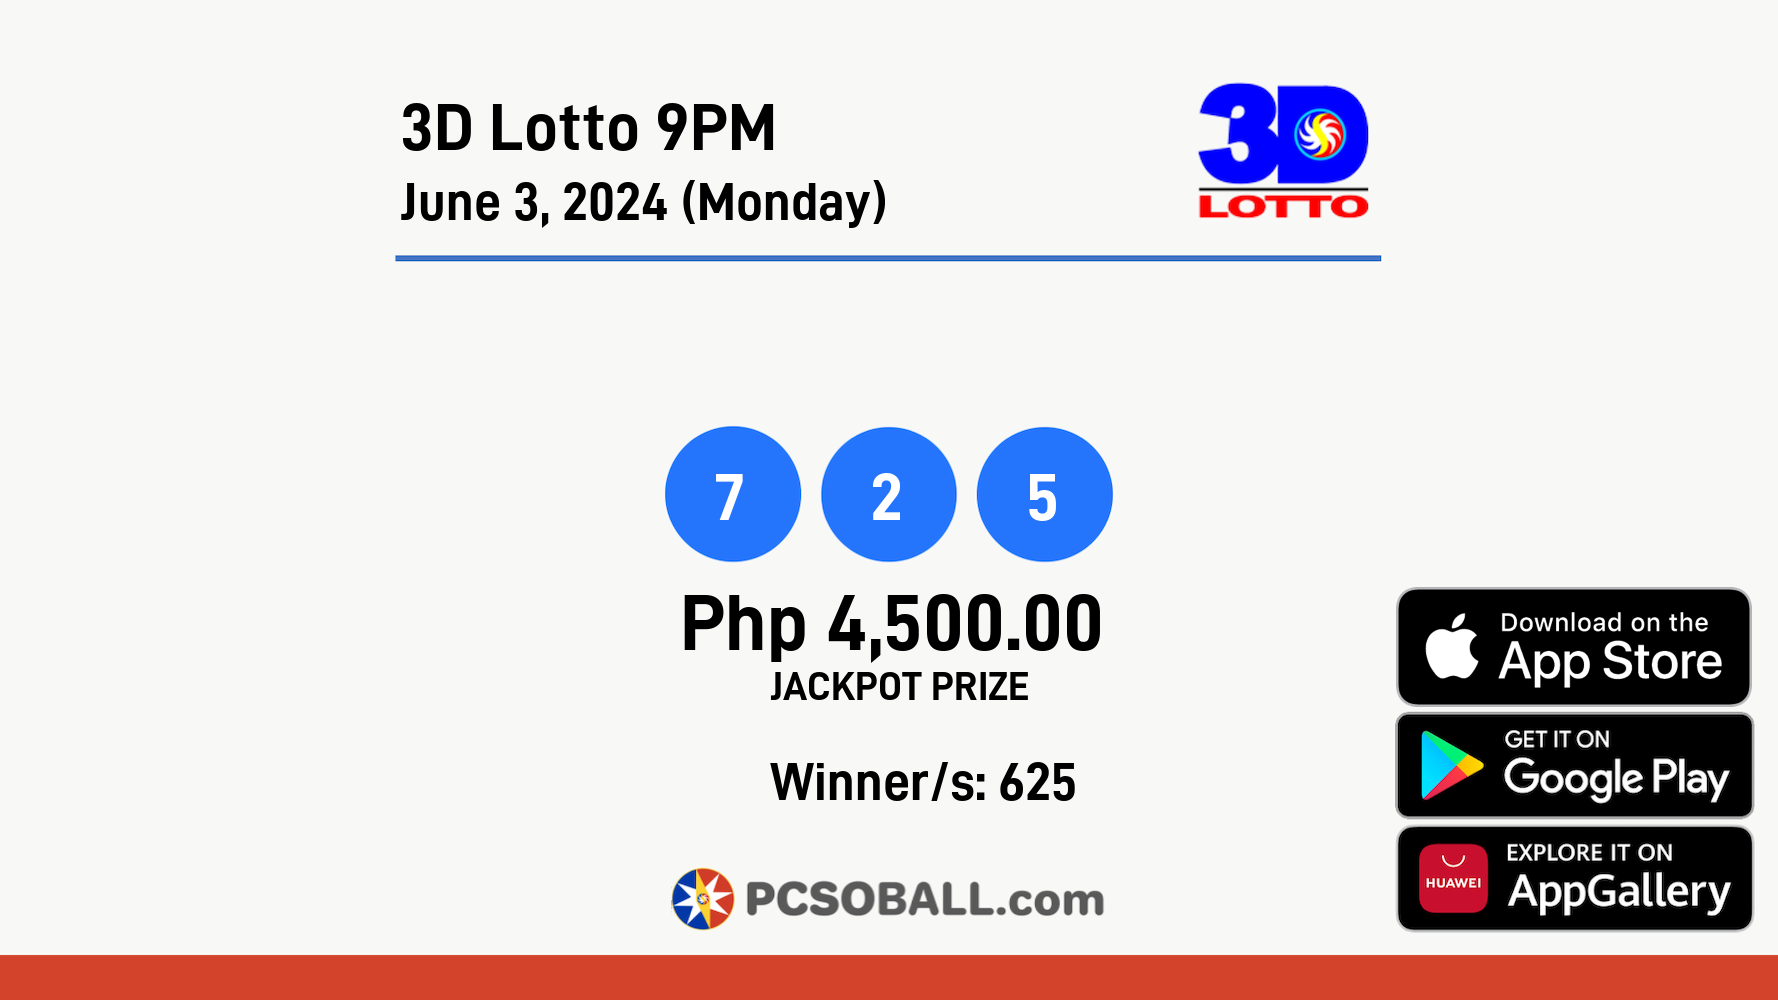 3D Lotto 9PM June 3, 2024 (Monday) Result